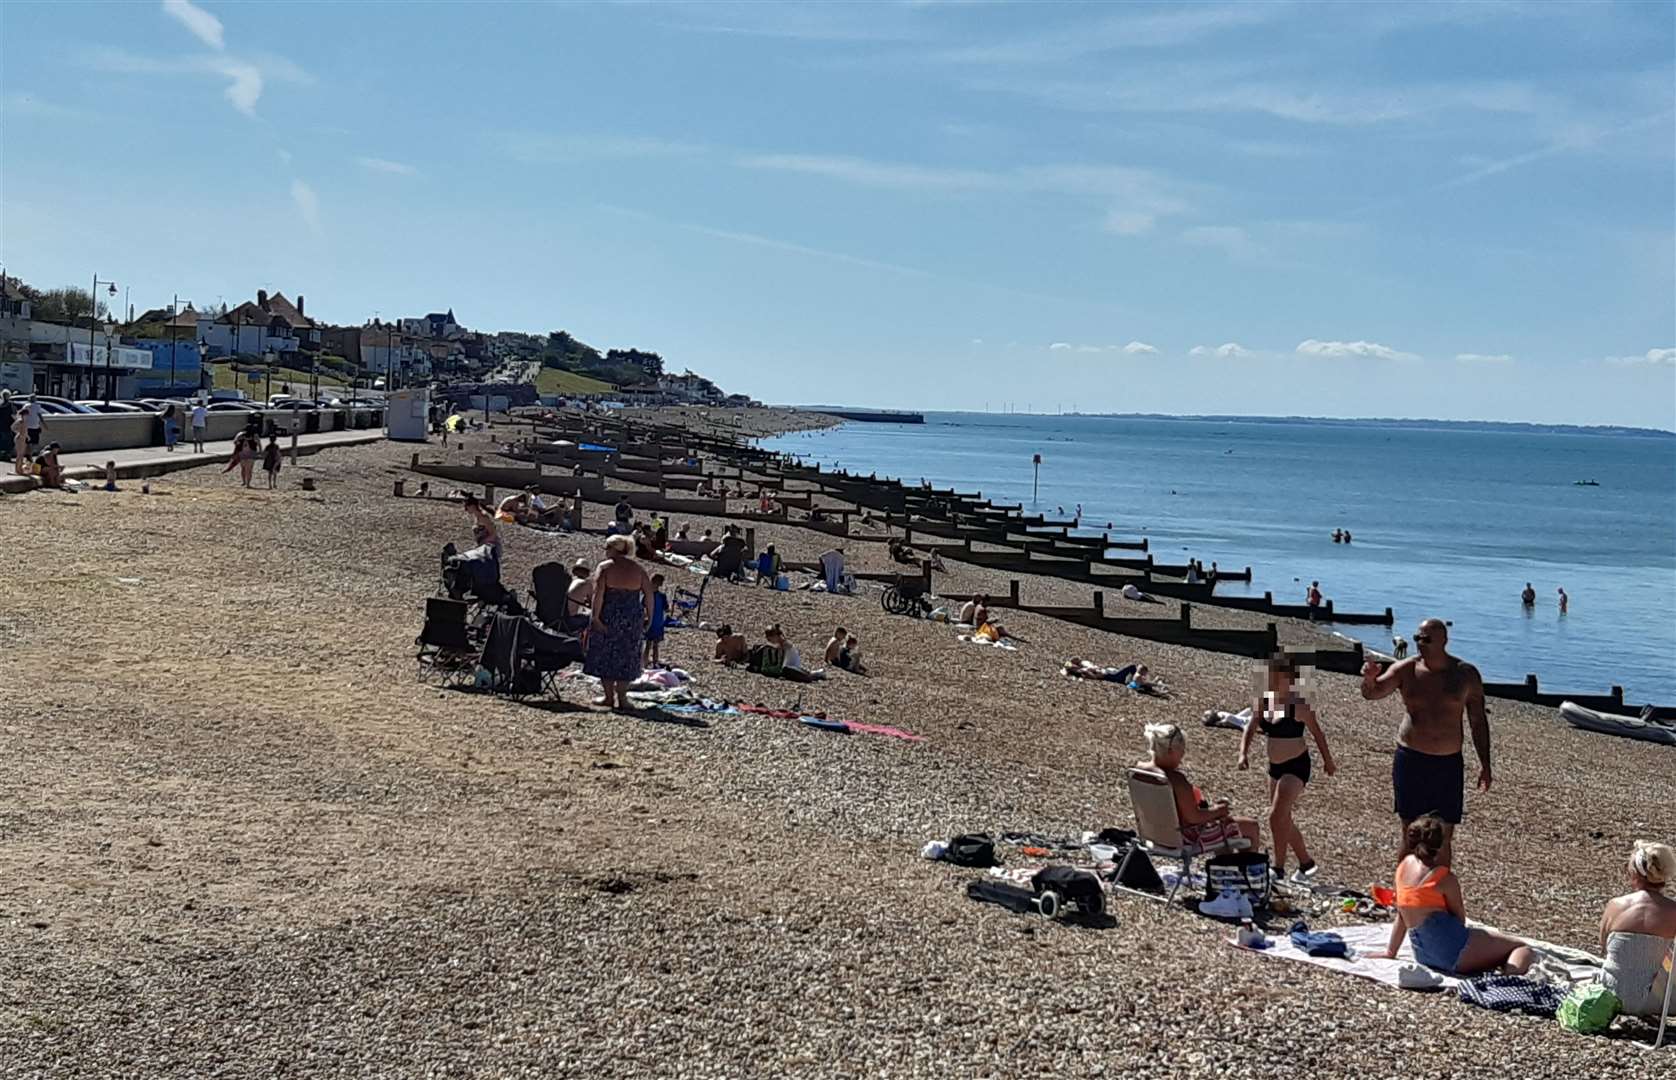 Crowds flock to the beach in Herne Bay as lockdown measures are eased